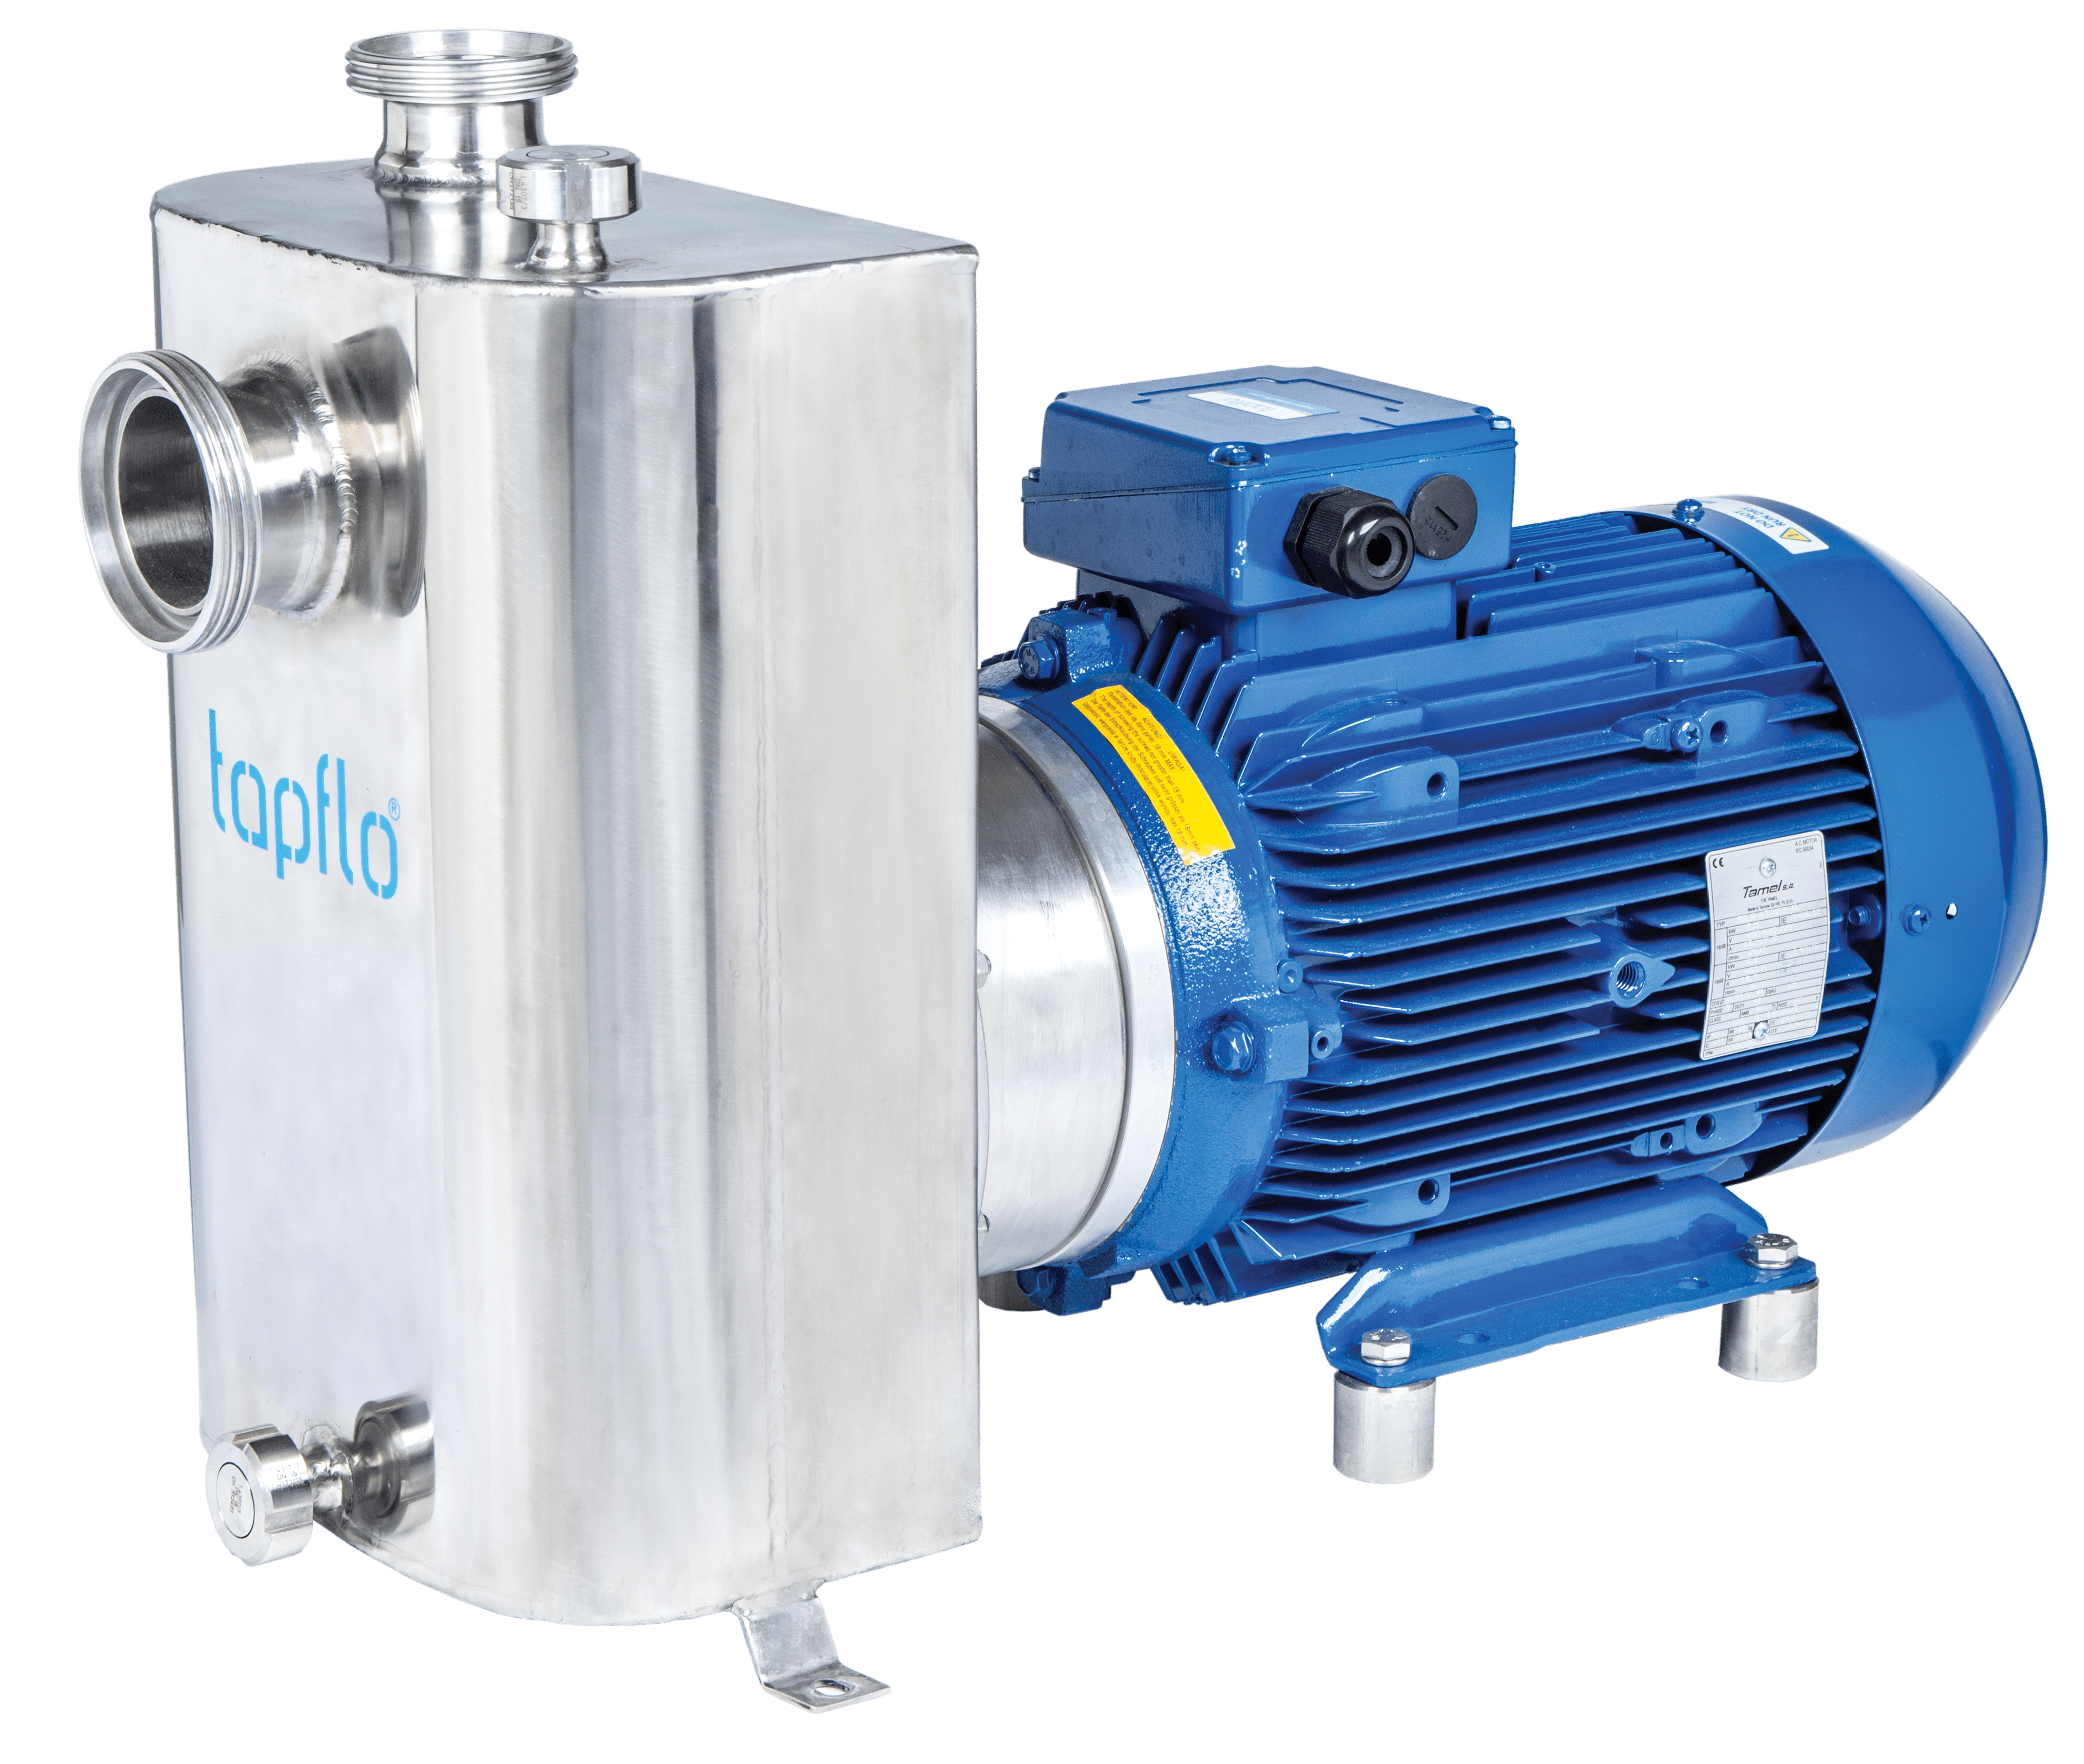 CTS centrifugal pumps